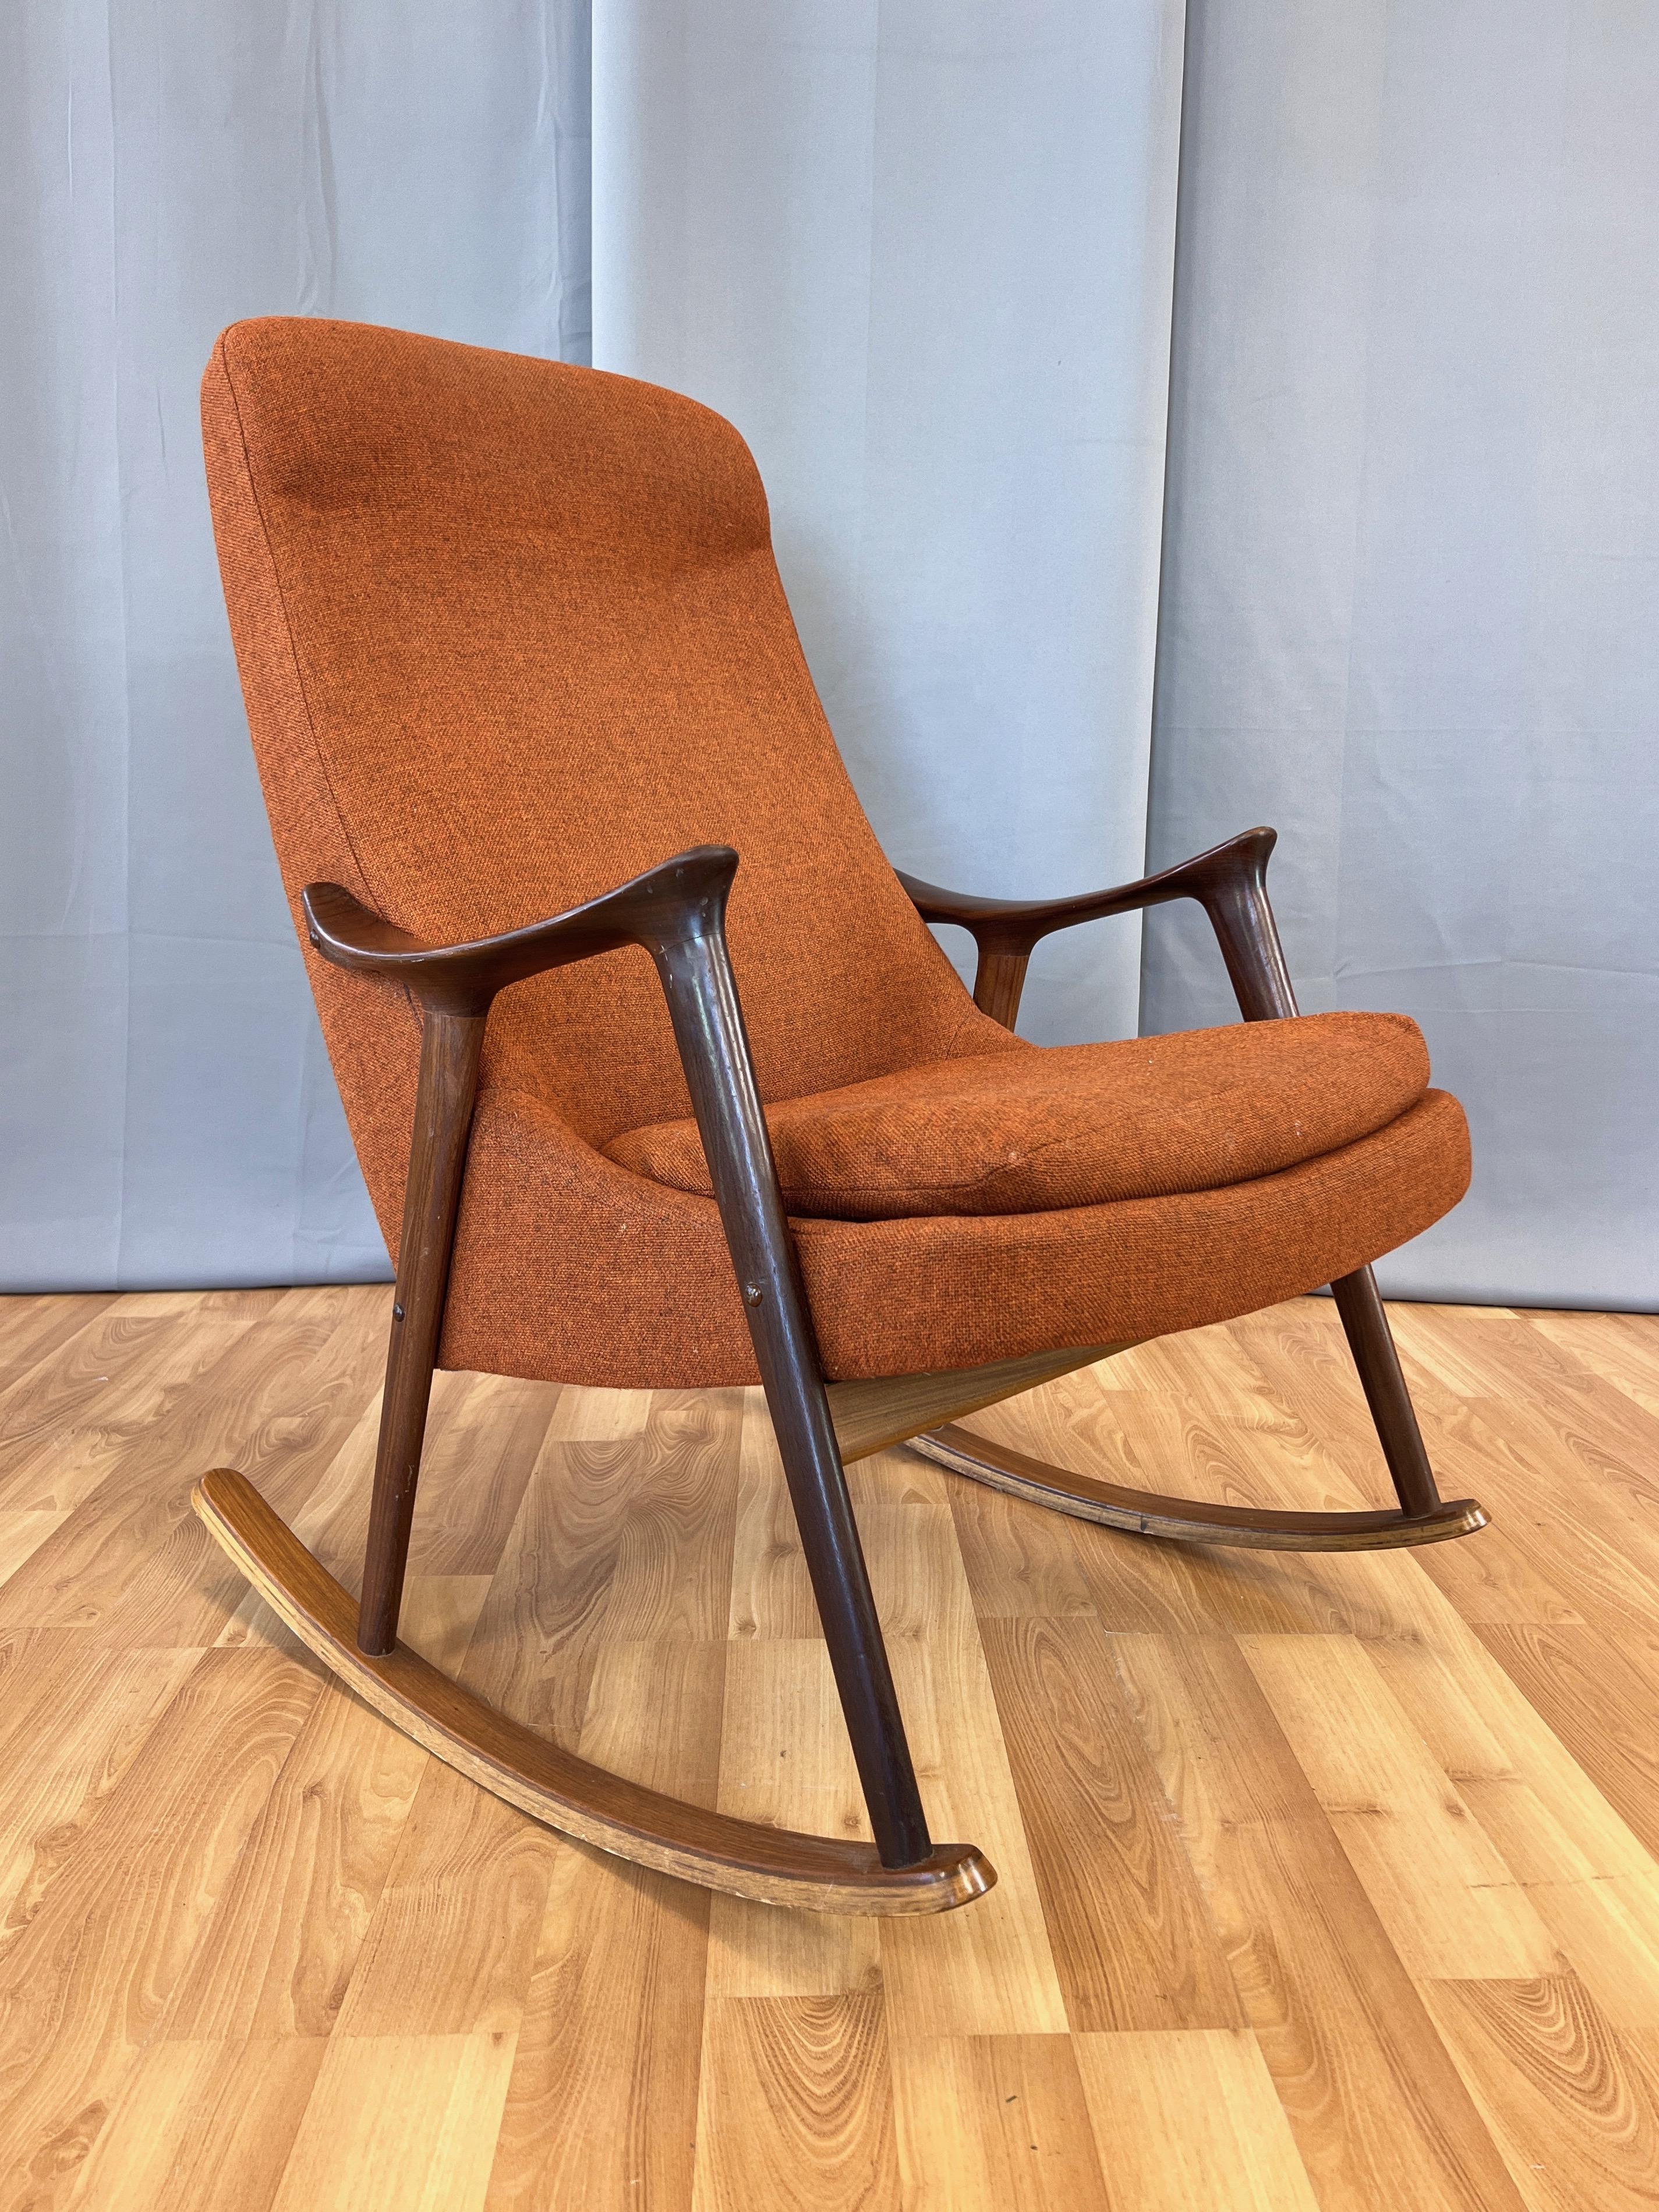 Ingmar Relling for Westnofa High-Back Sculptural Teak Rocking Chair, 1960s In Good Condition For Sale In San Francisco, CA